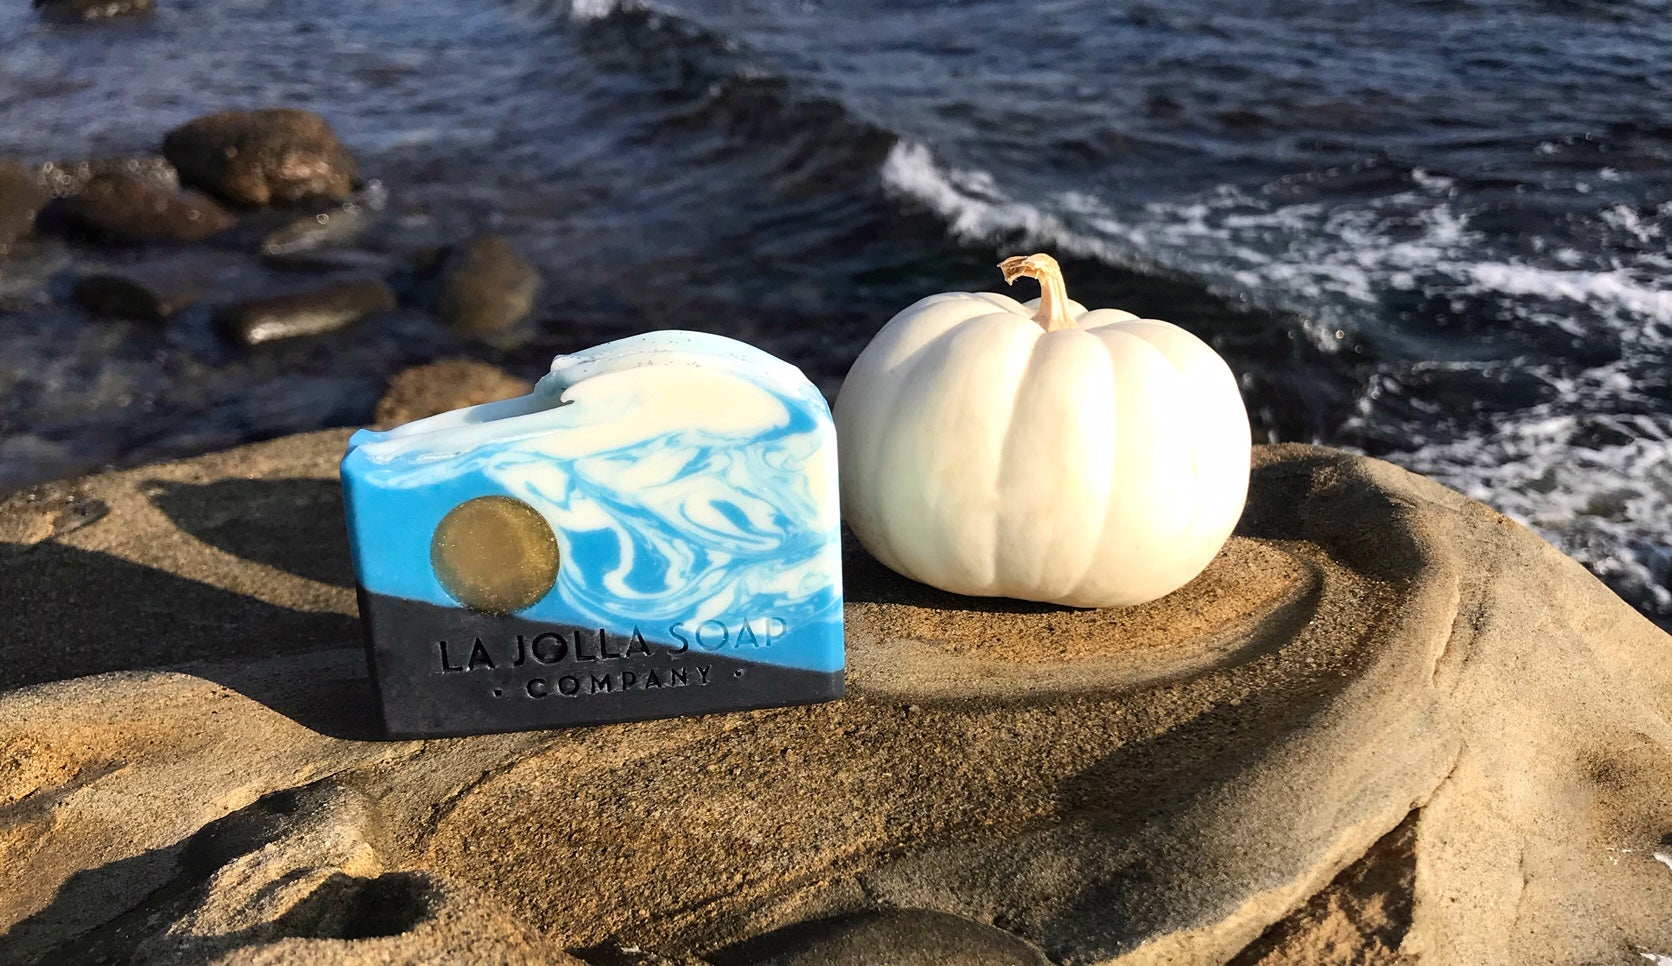 La Jolla Soap Company - Handcrafted natural soaps made with love for you and the earth, free from unwanted toxins.